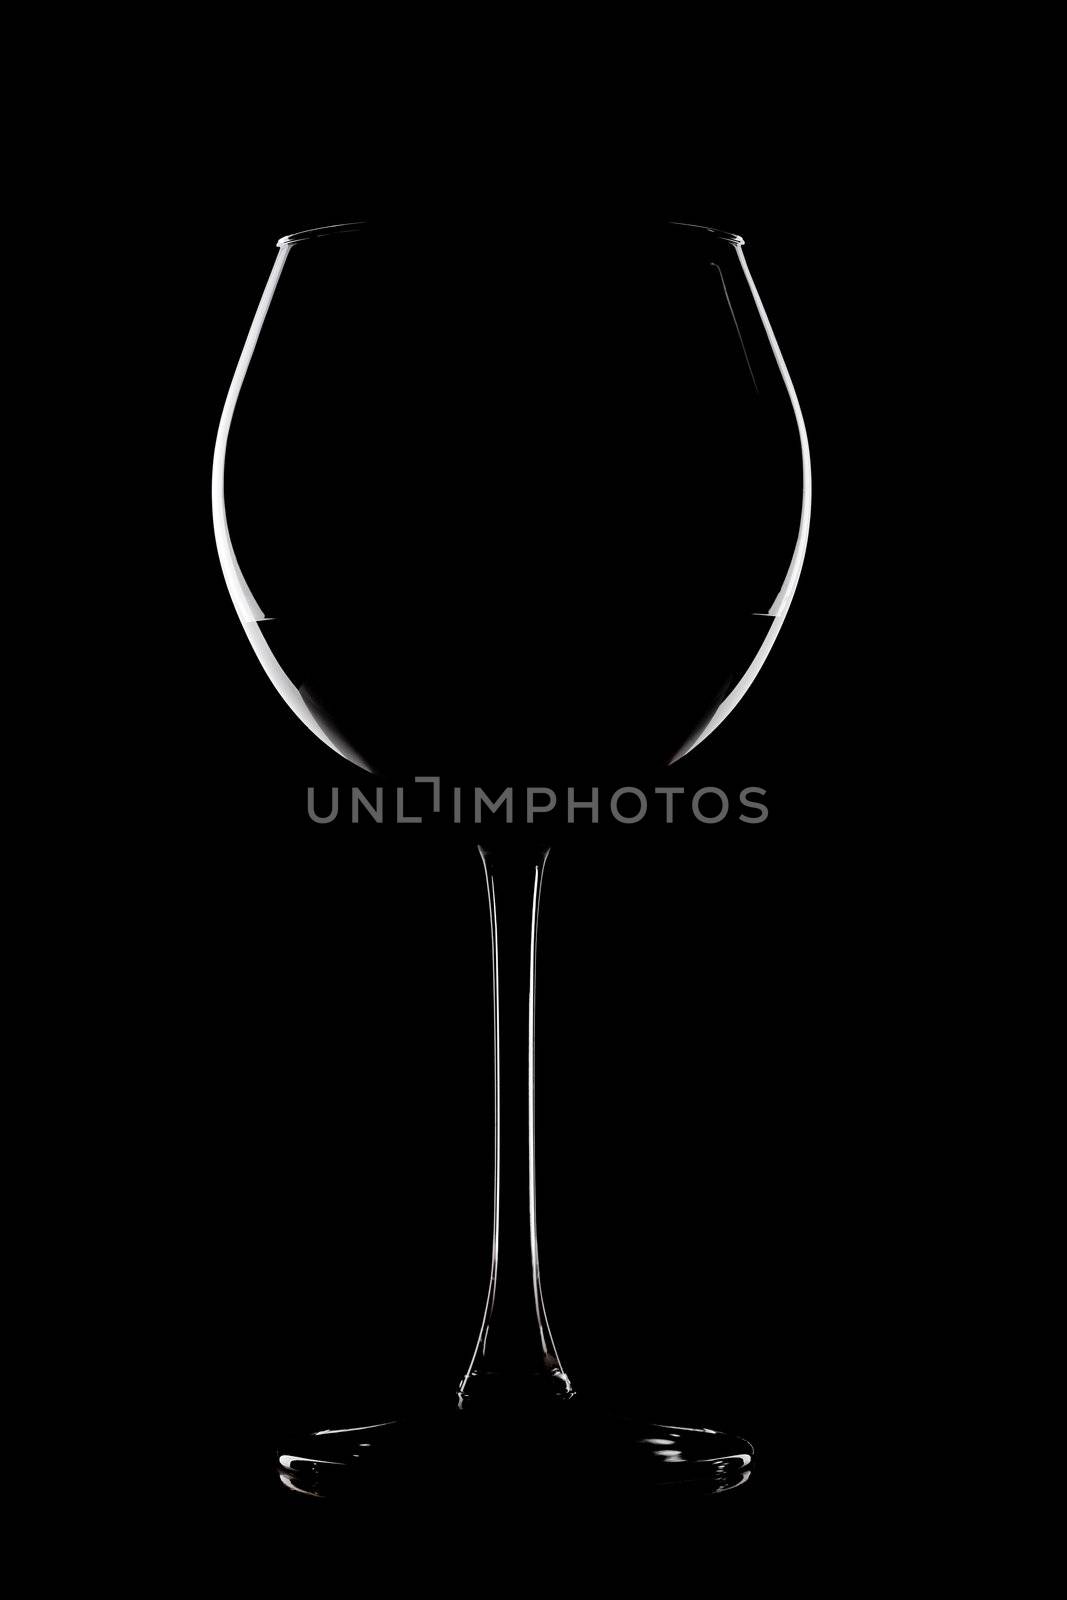 abstract wine glass contour against black background